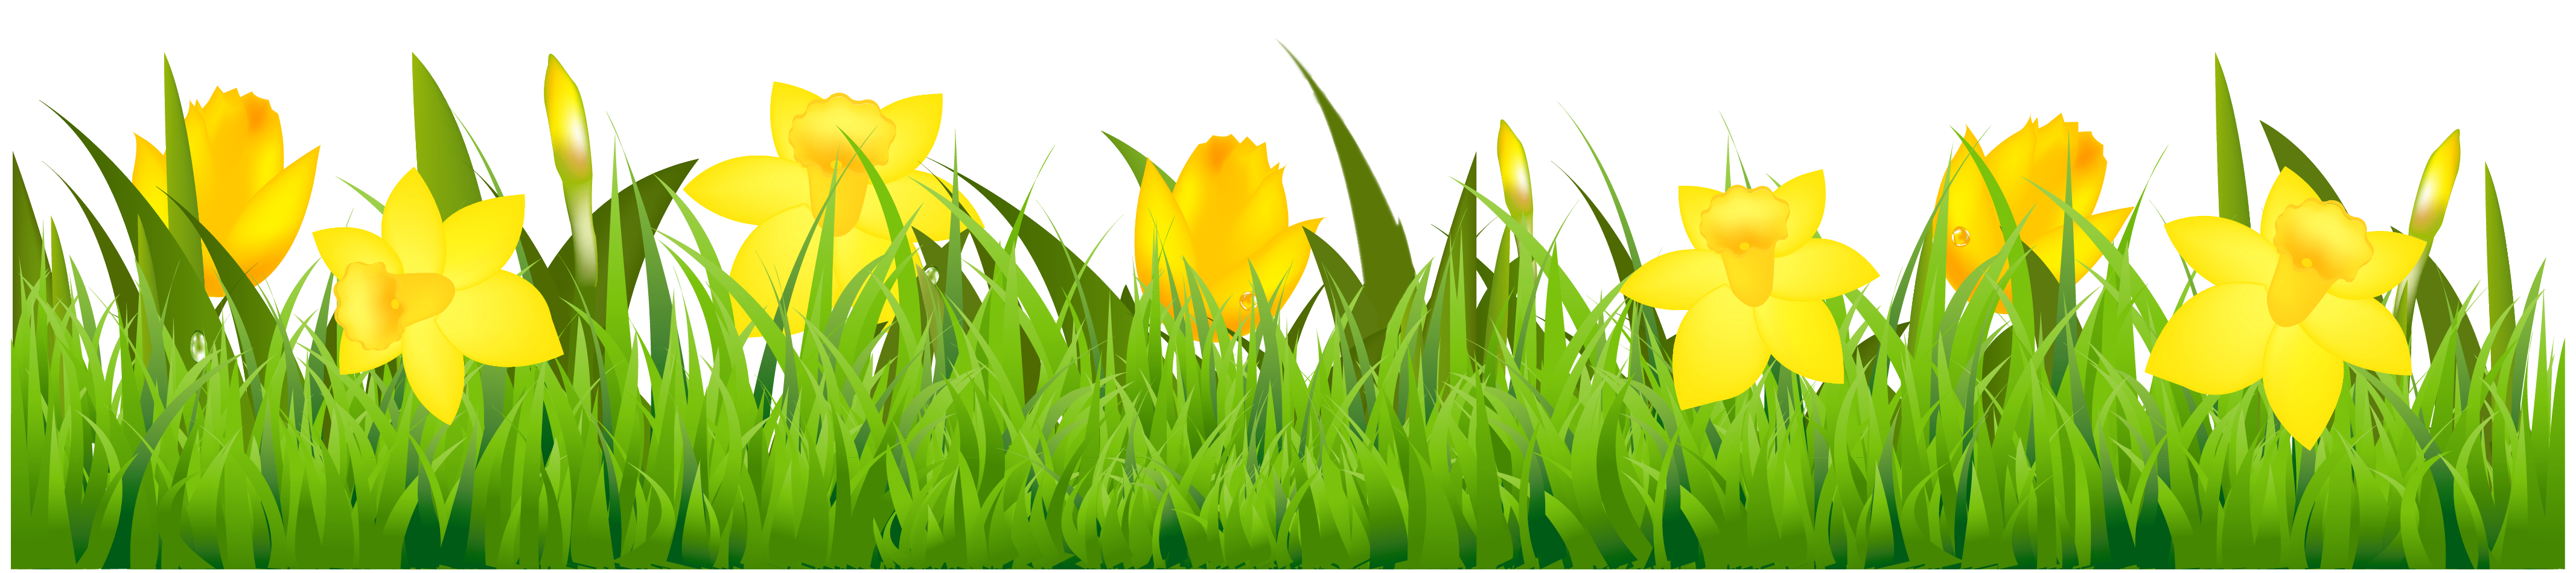 clipart flowers daffodils - photo #31